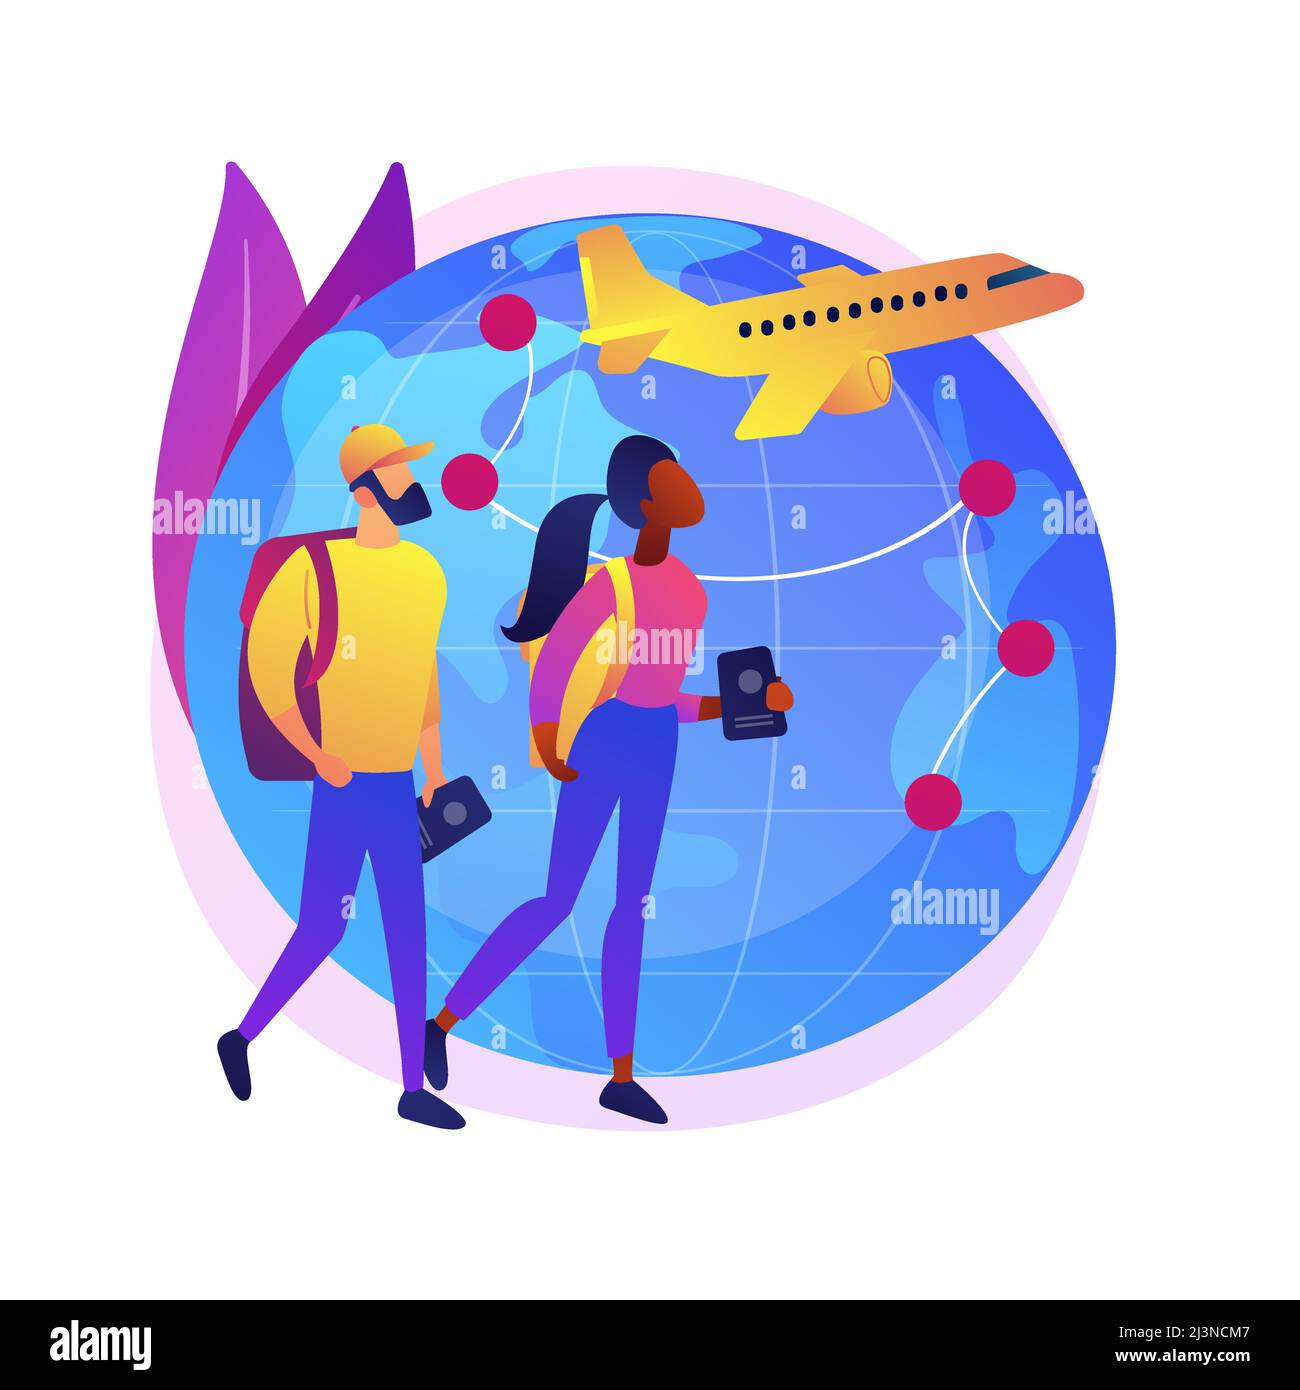 Global travelling abstract concept vector illustration. Global insurance, world trip, international tourism, travel agency, working holiday, luxury va Stock Vector